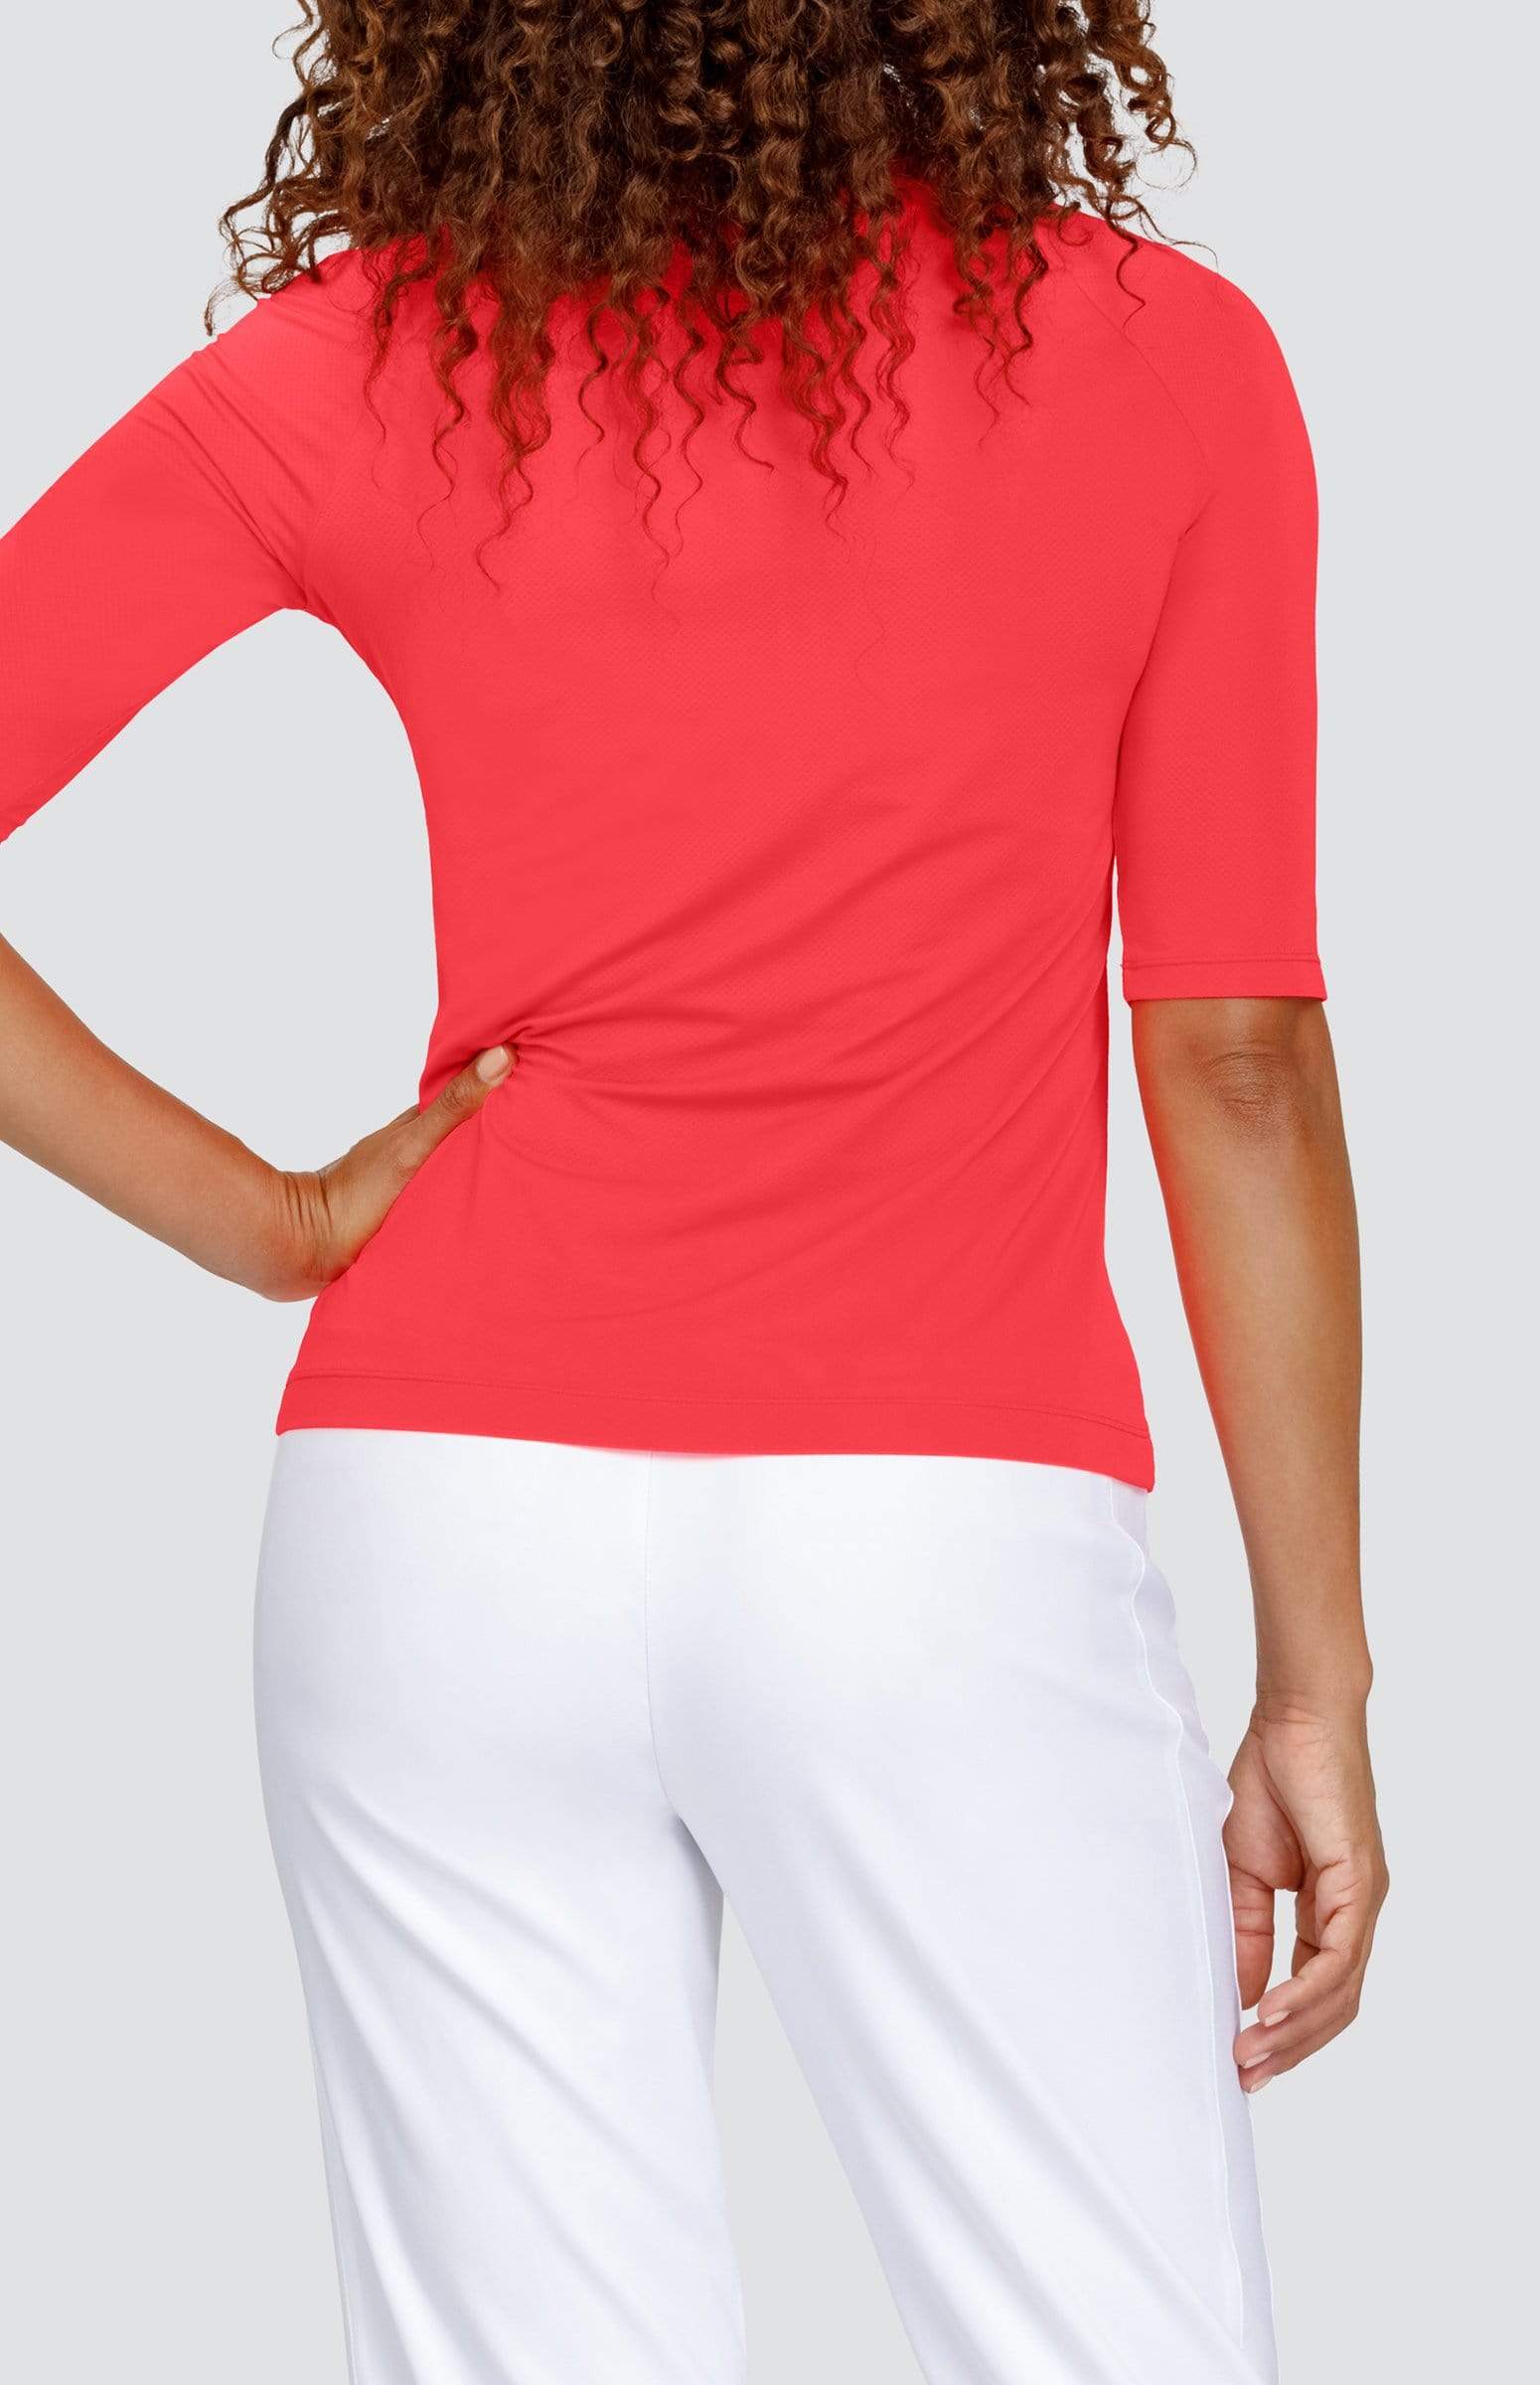 Tail Activewear Oakley Women's Golf Top - Aurora - FINAL SALE - Fore Ladies  - Golf Dresses and Clothes, Tennis Skirts and Outfits, and Fashionable  Activewear